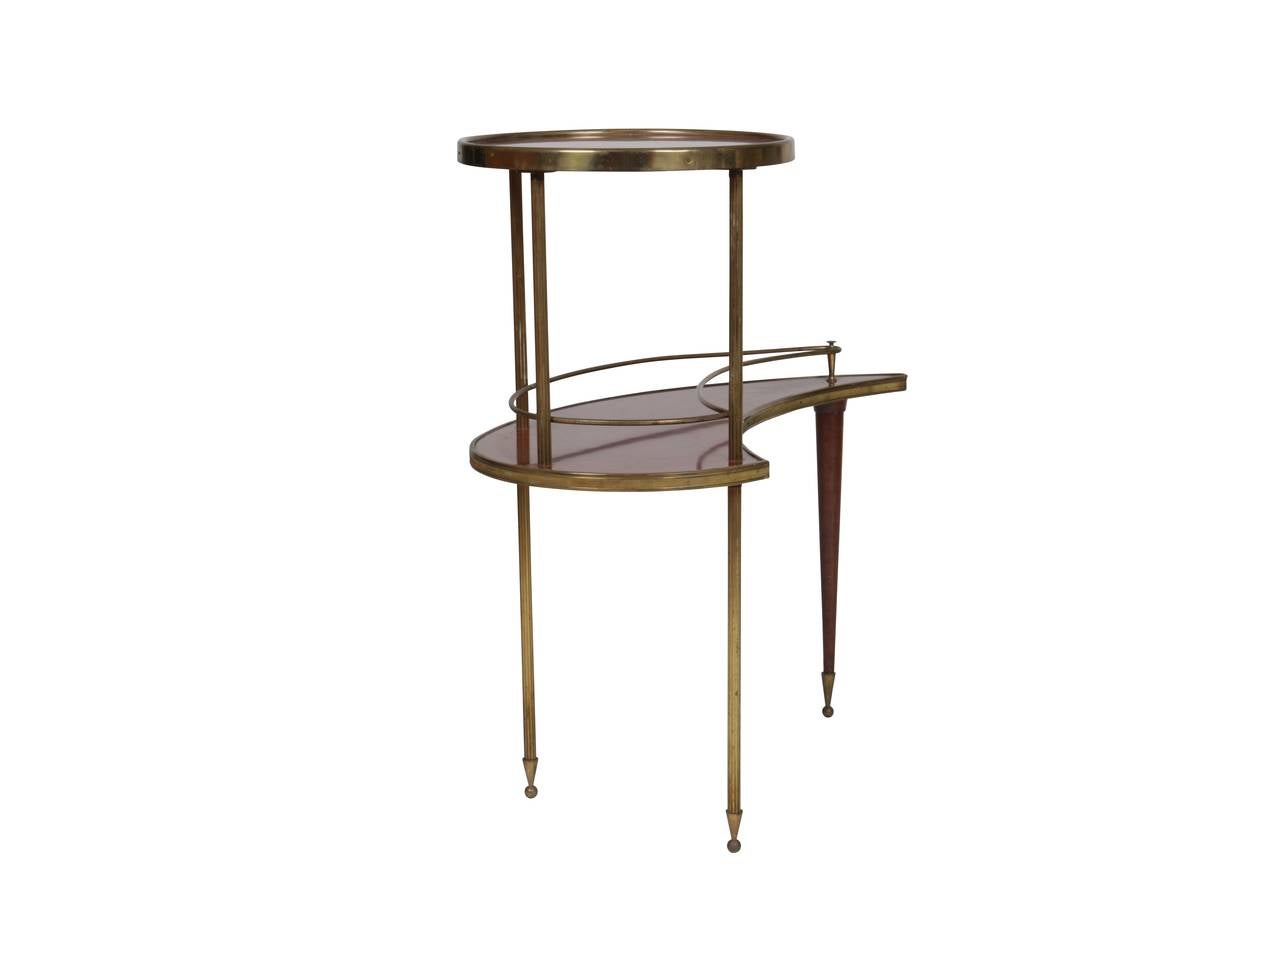 Side table comprised of two wood grain laminate tiers; the top being round and the lower tier organically shaped. The legs are ribbed brass that terminate with brass cone and ball feet. The front leg is wood tapering to a fine point with matched